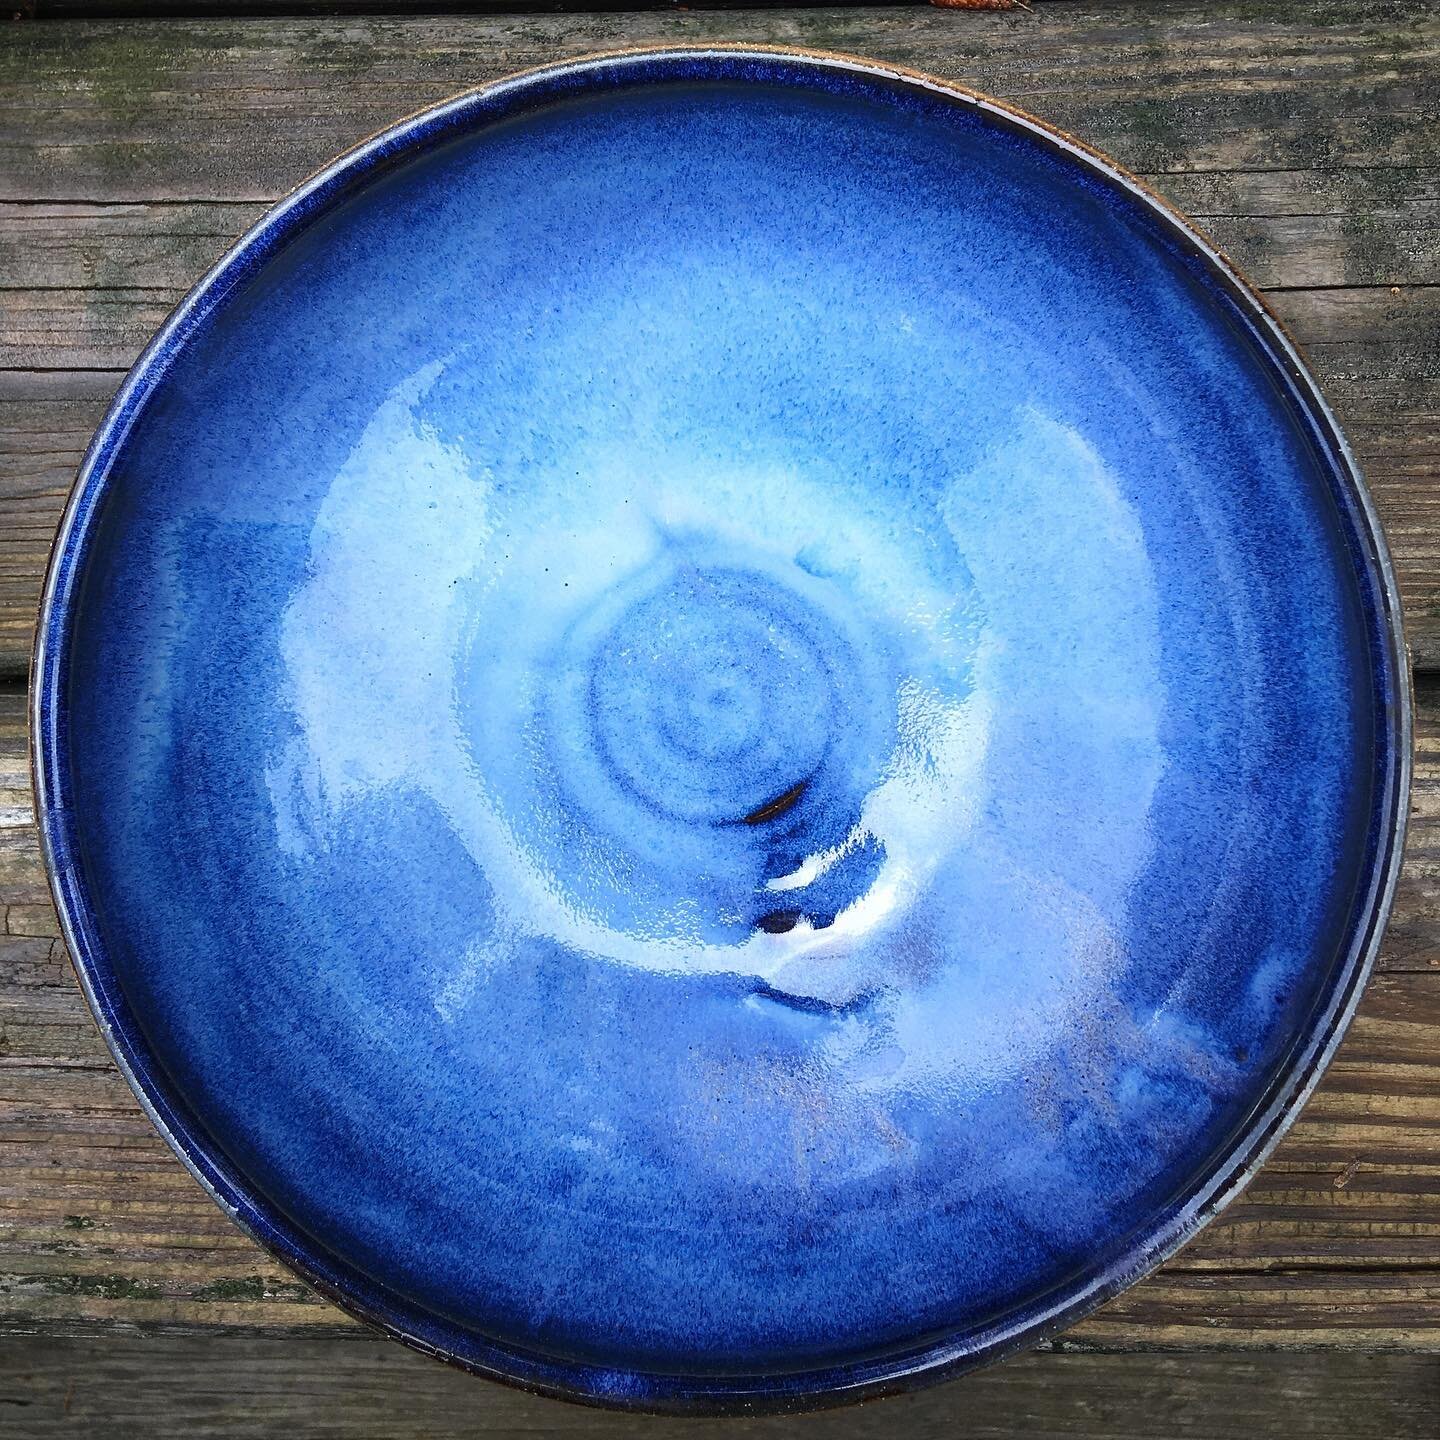 This blue, y&rsquo;all. This is the inside of the summer fields carved bowl (a few posts back), and it wows me every time I look at it.

I&rsquo;m slowly developing a palette of colors I especially love, and blues feature heavily amongst them. This o